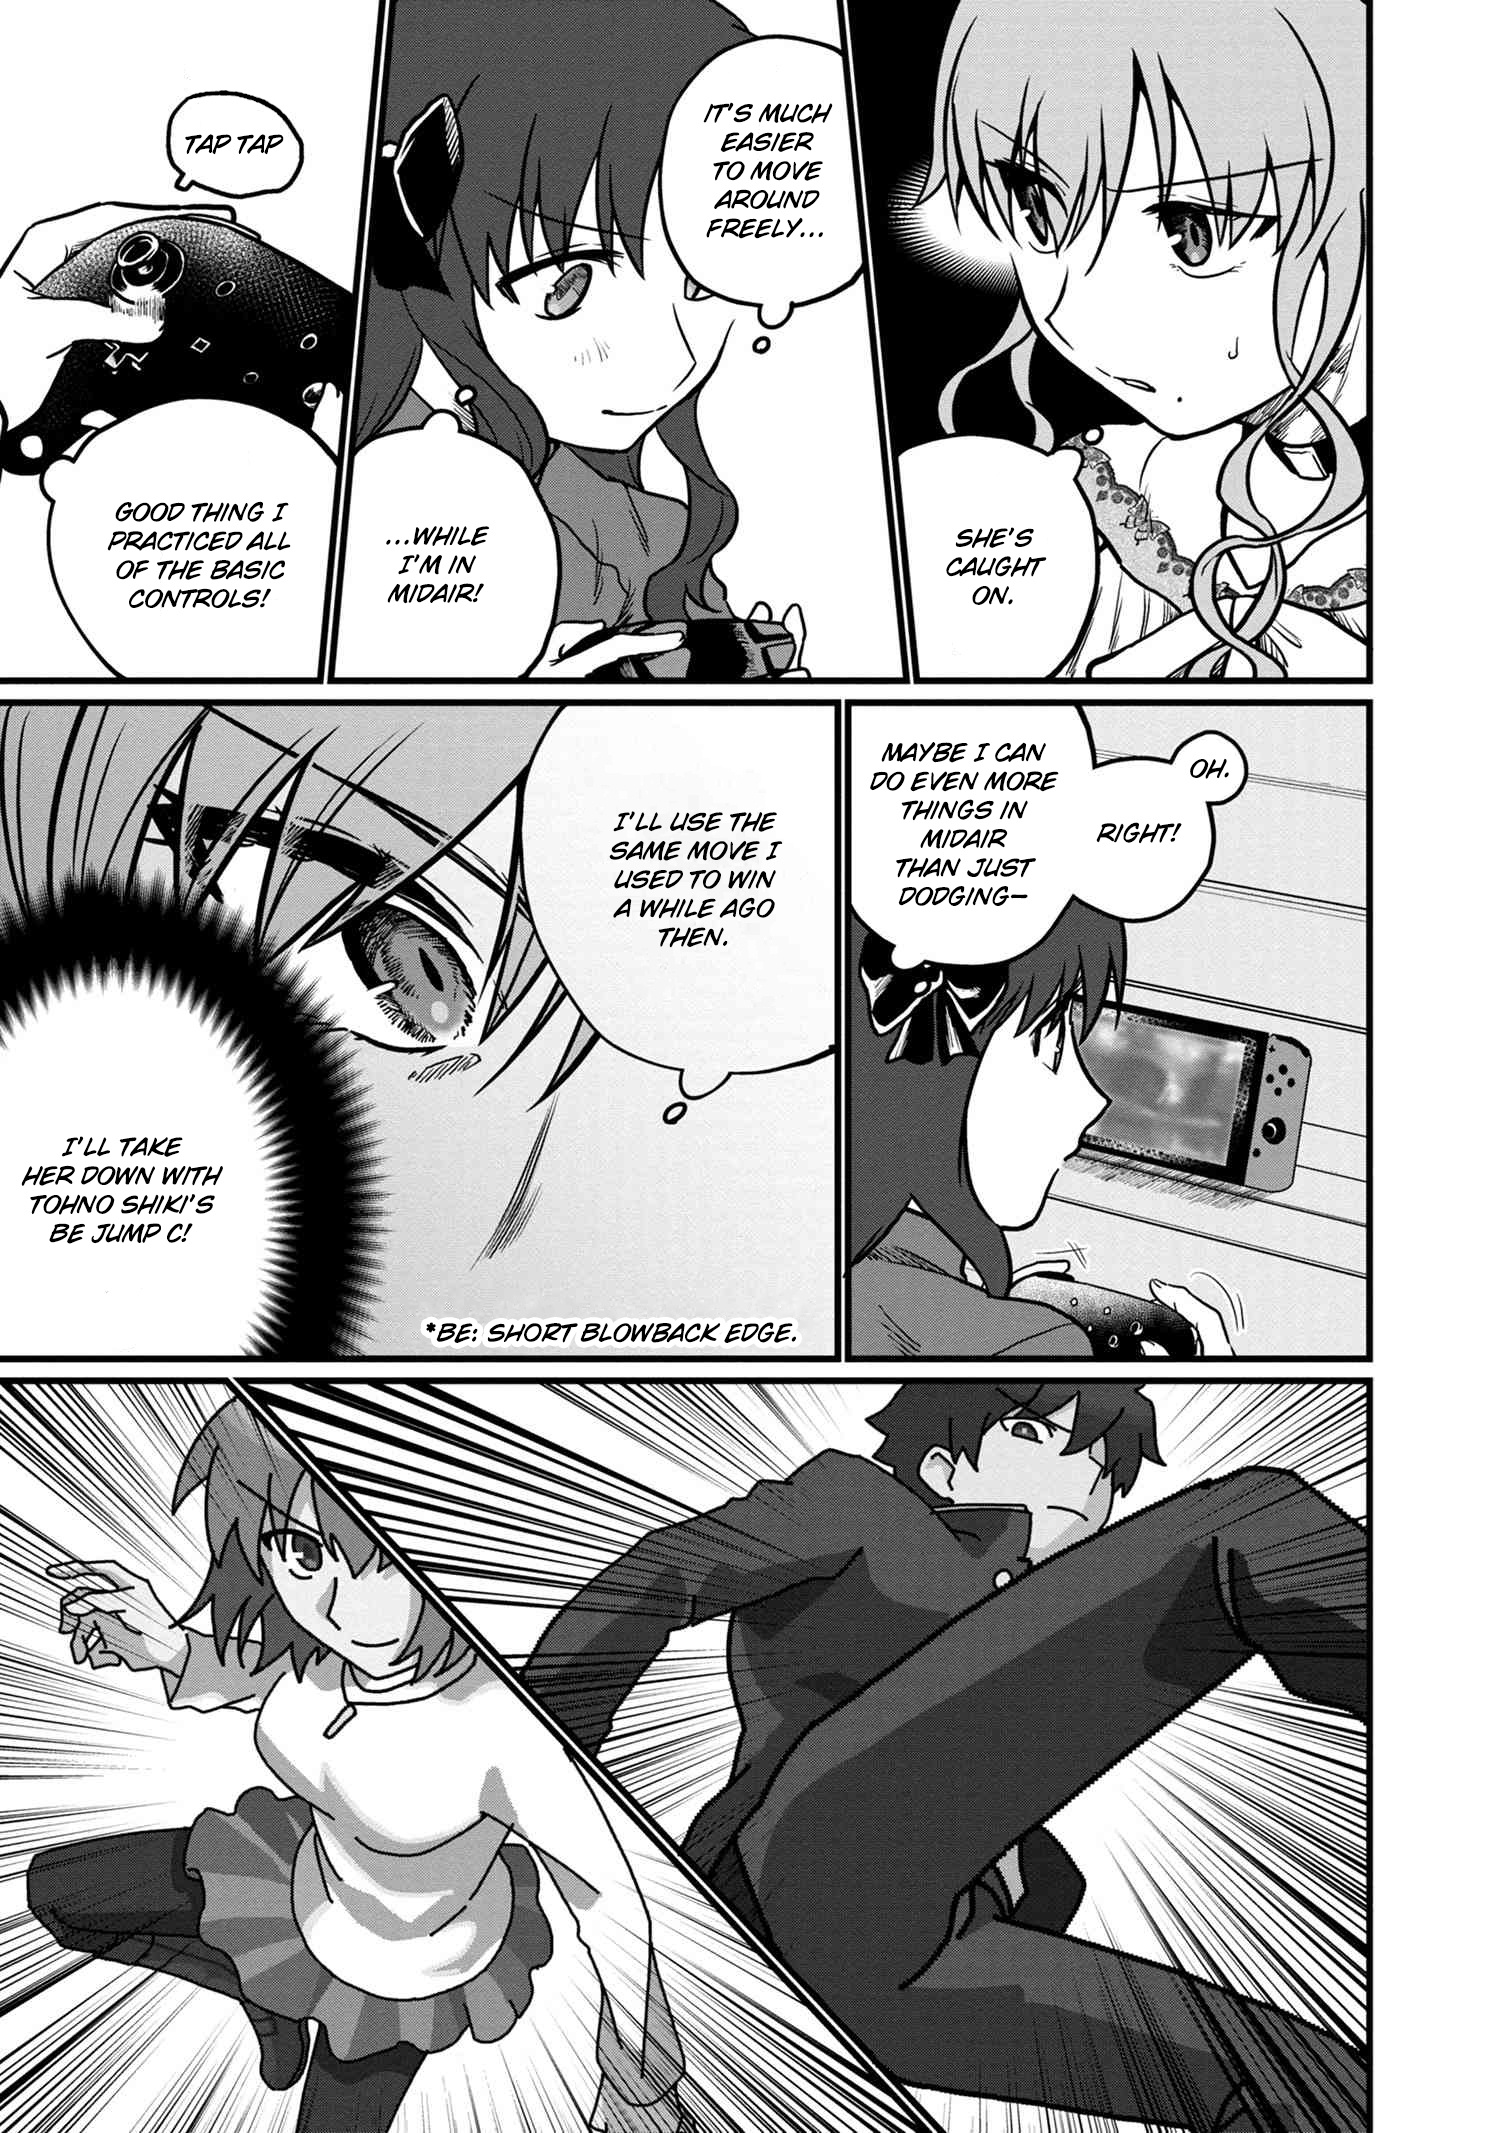 Melty Blood: Type Lumina Piece In Paradise - chapter 7.2 - #2